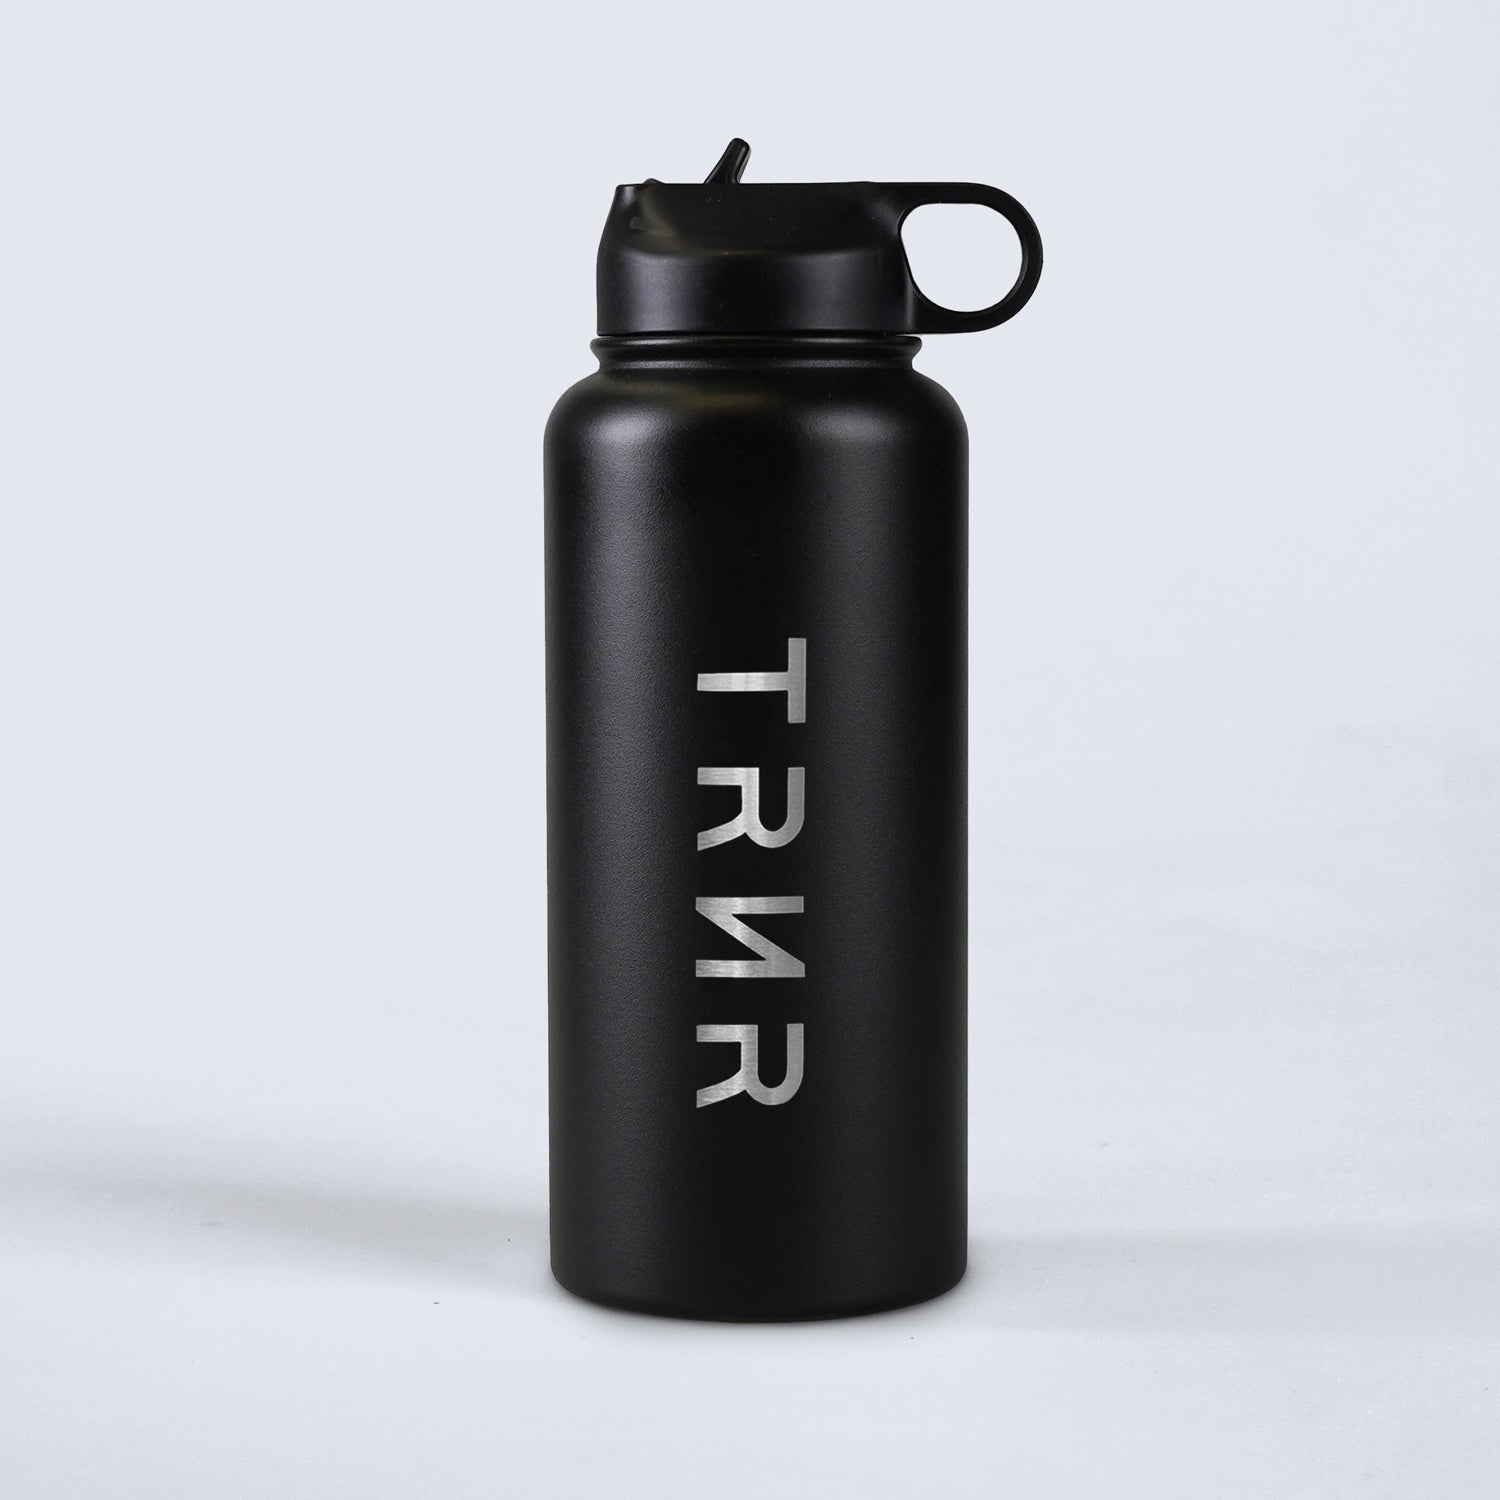 TRNR Sports Bottle (Black) in 946 ml capacity | Product Overview Featuring TRNR Logo and Flip Spout with Handle